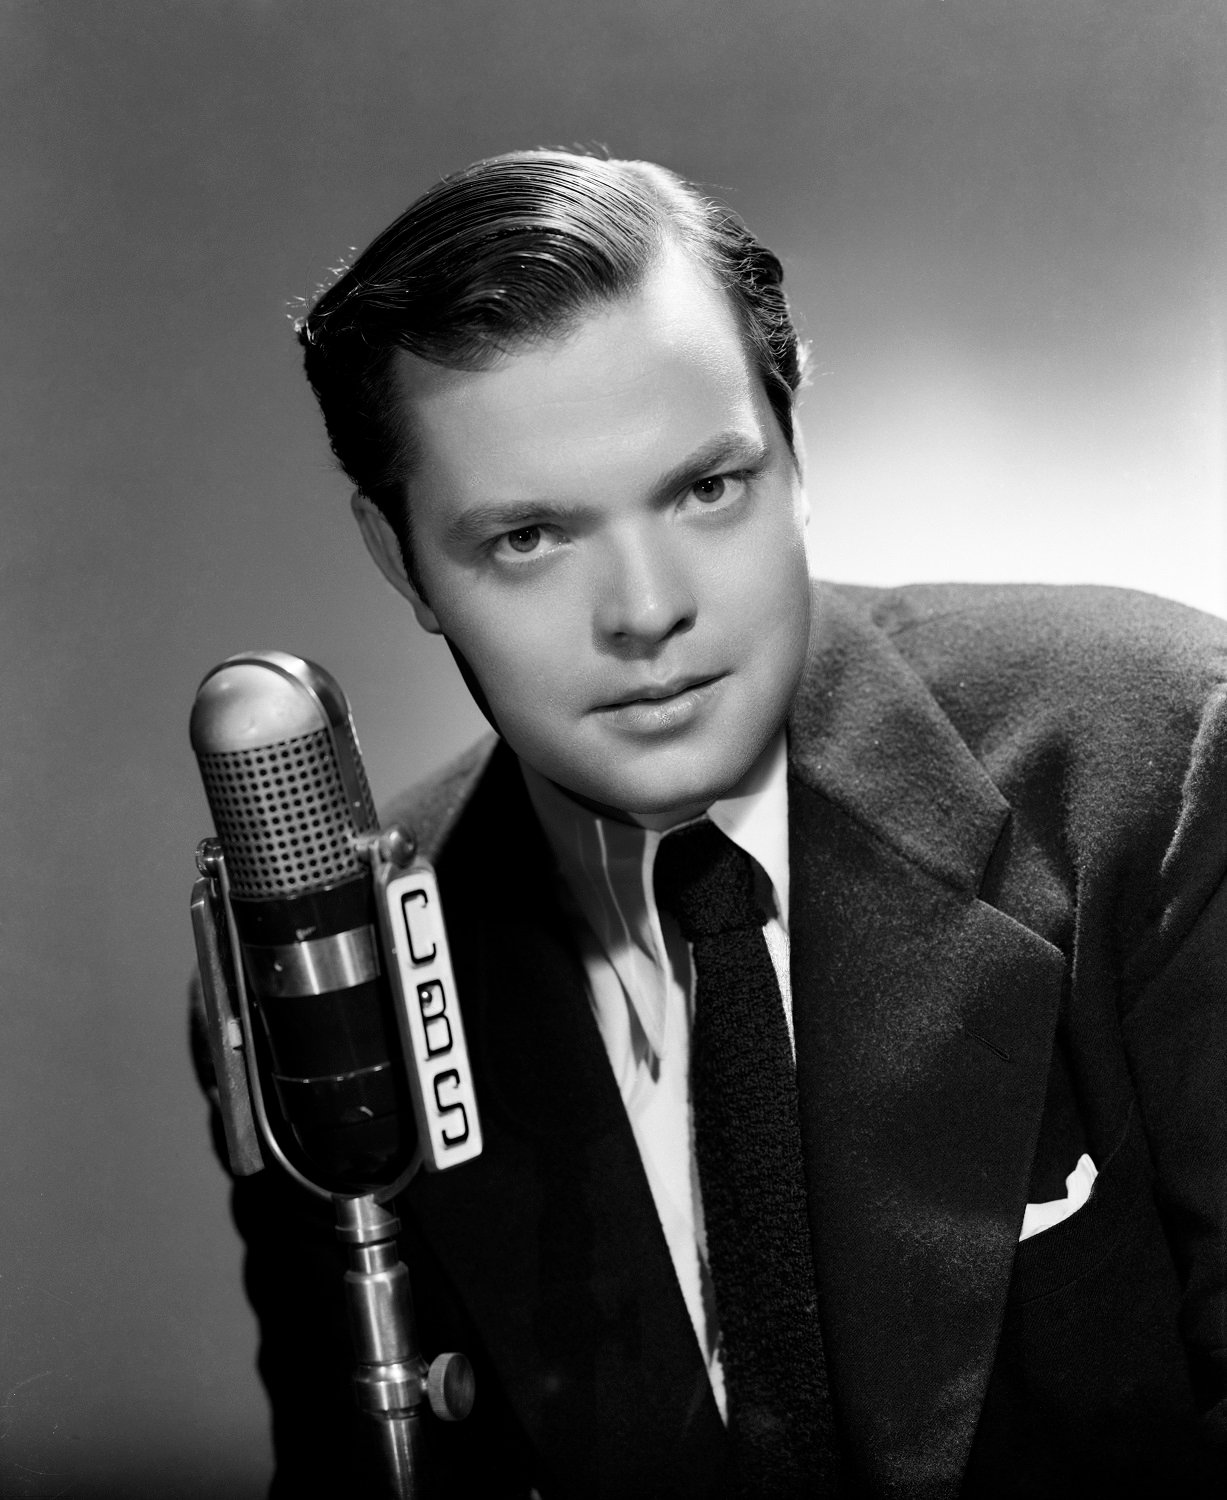 Orson Welles poses for a portrait in New York City